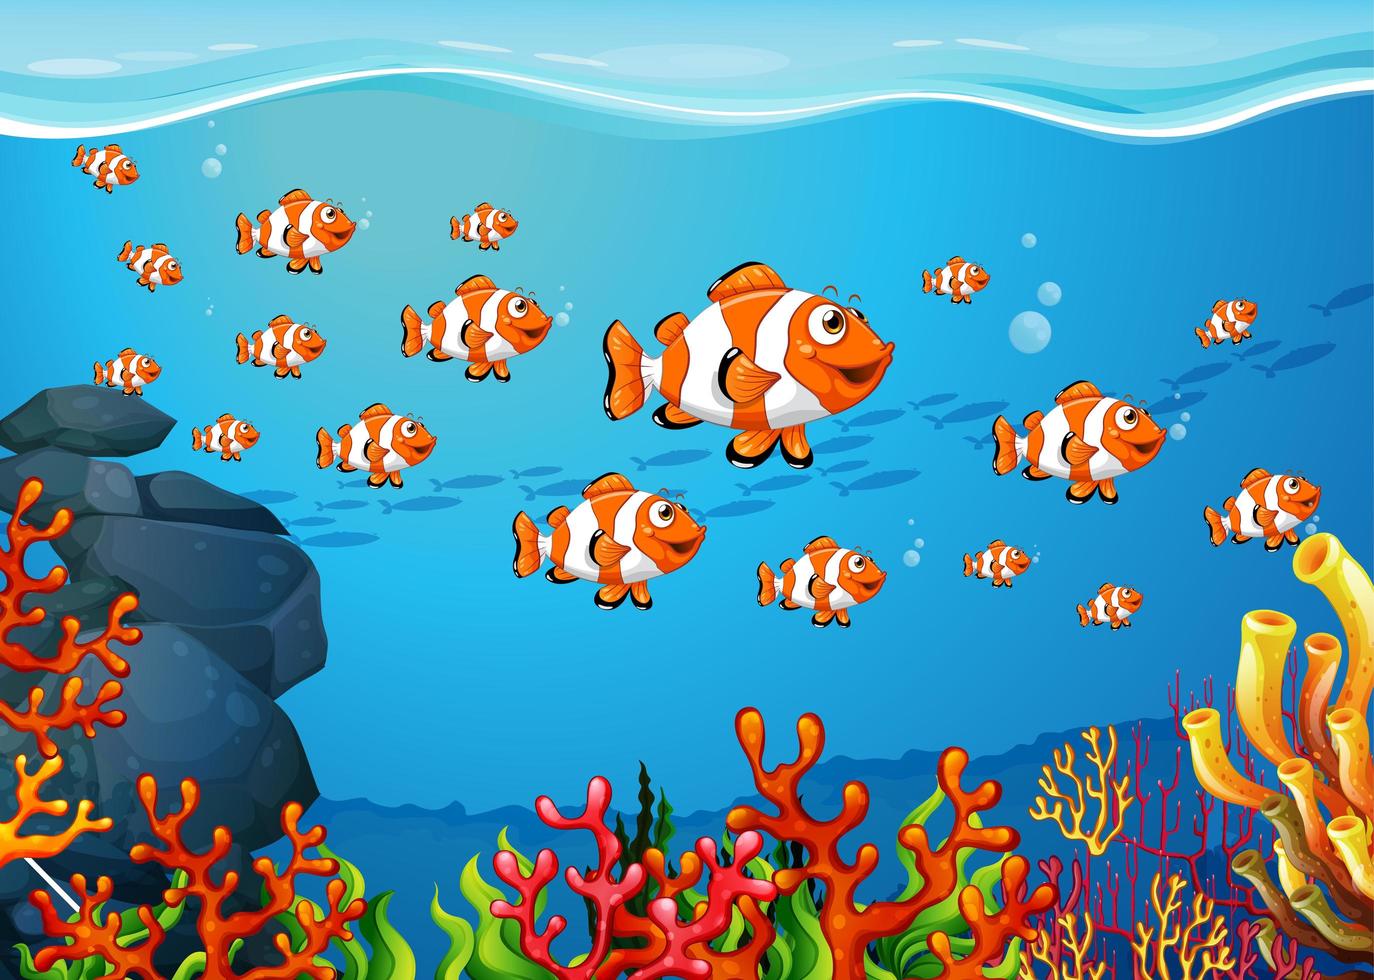 Many exotic fishes cartoon character in the underwater background vector